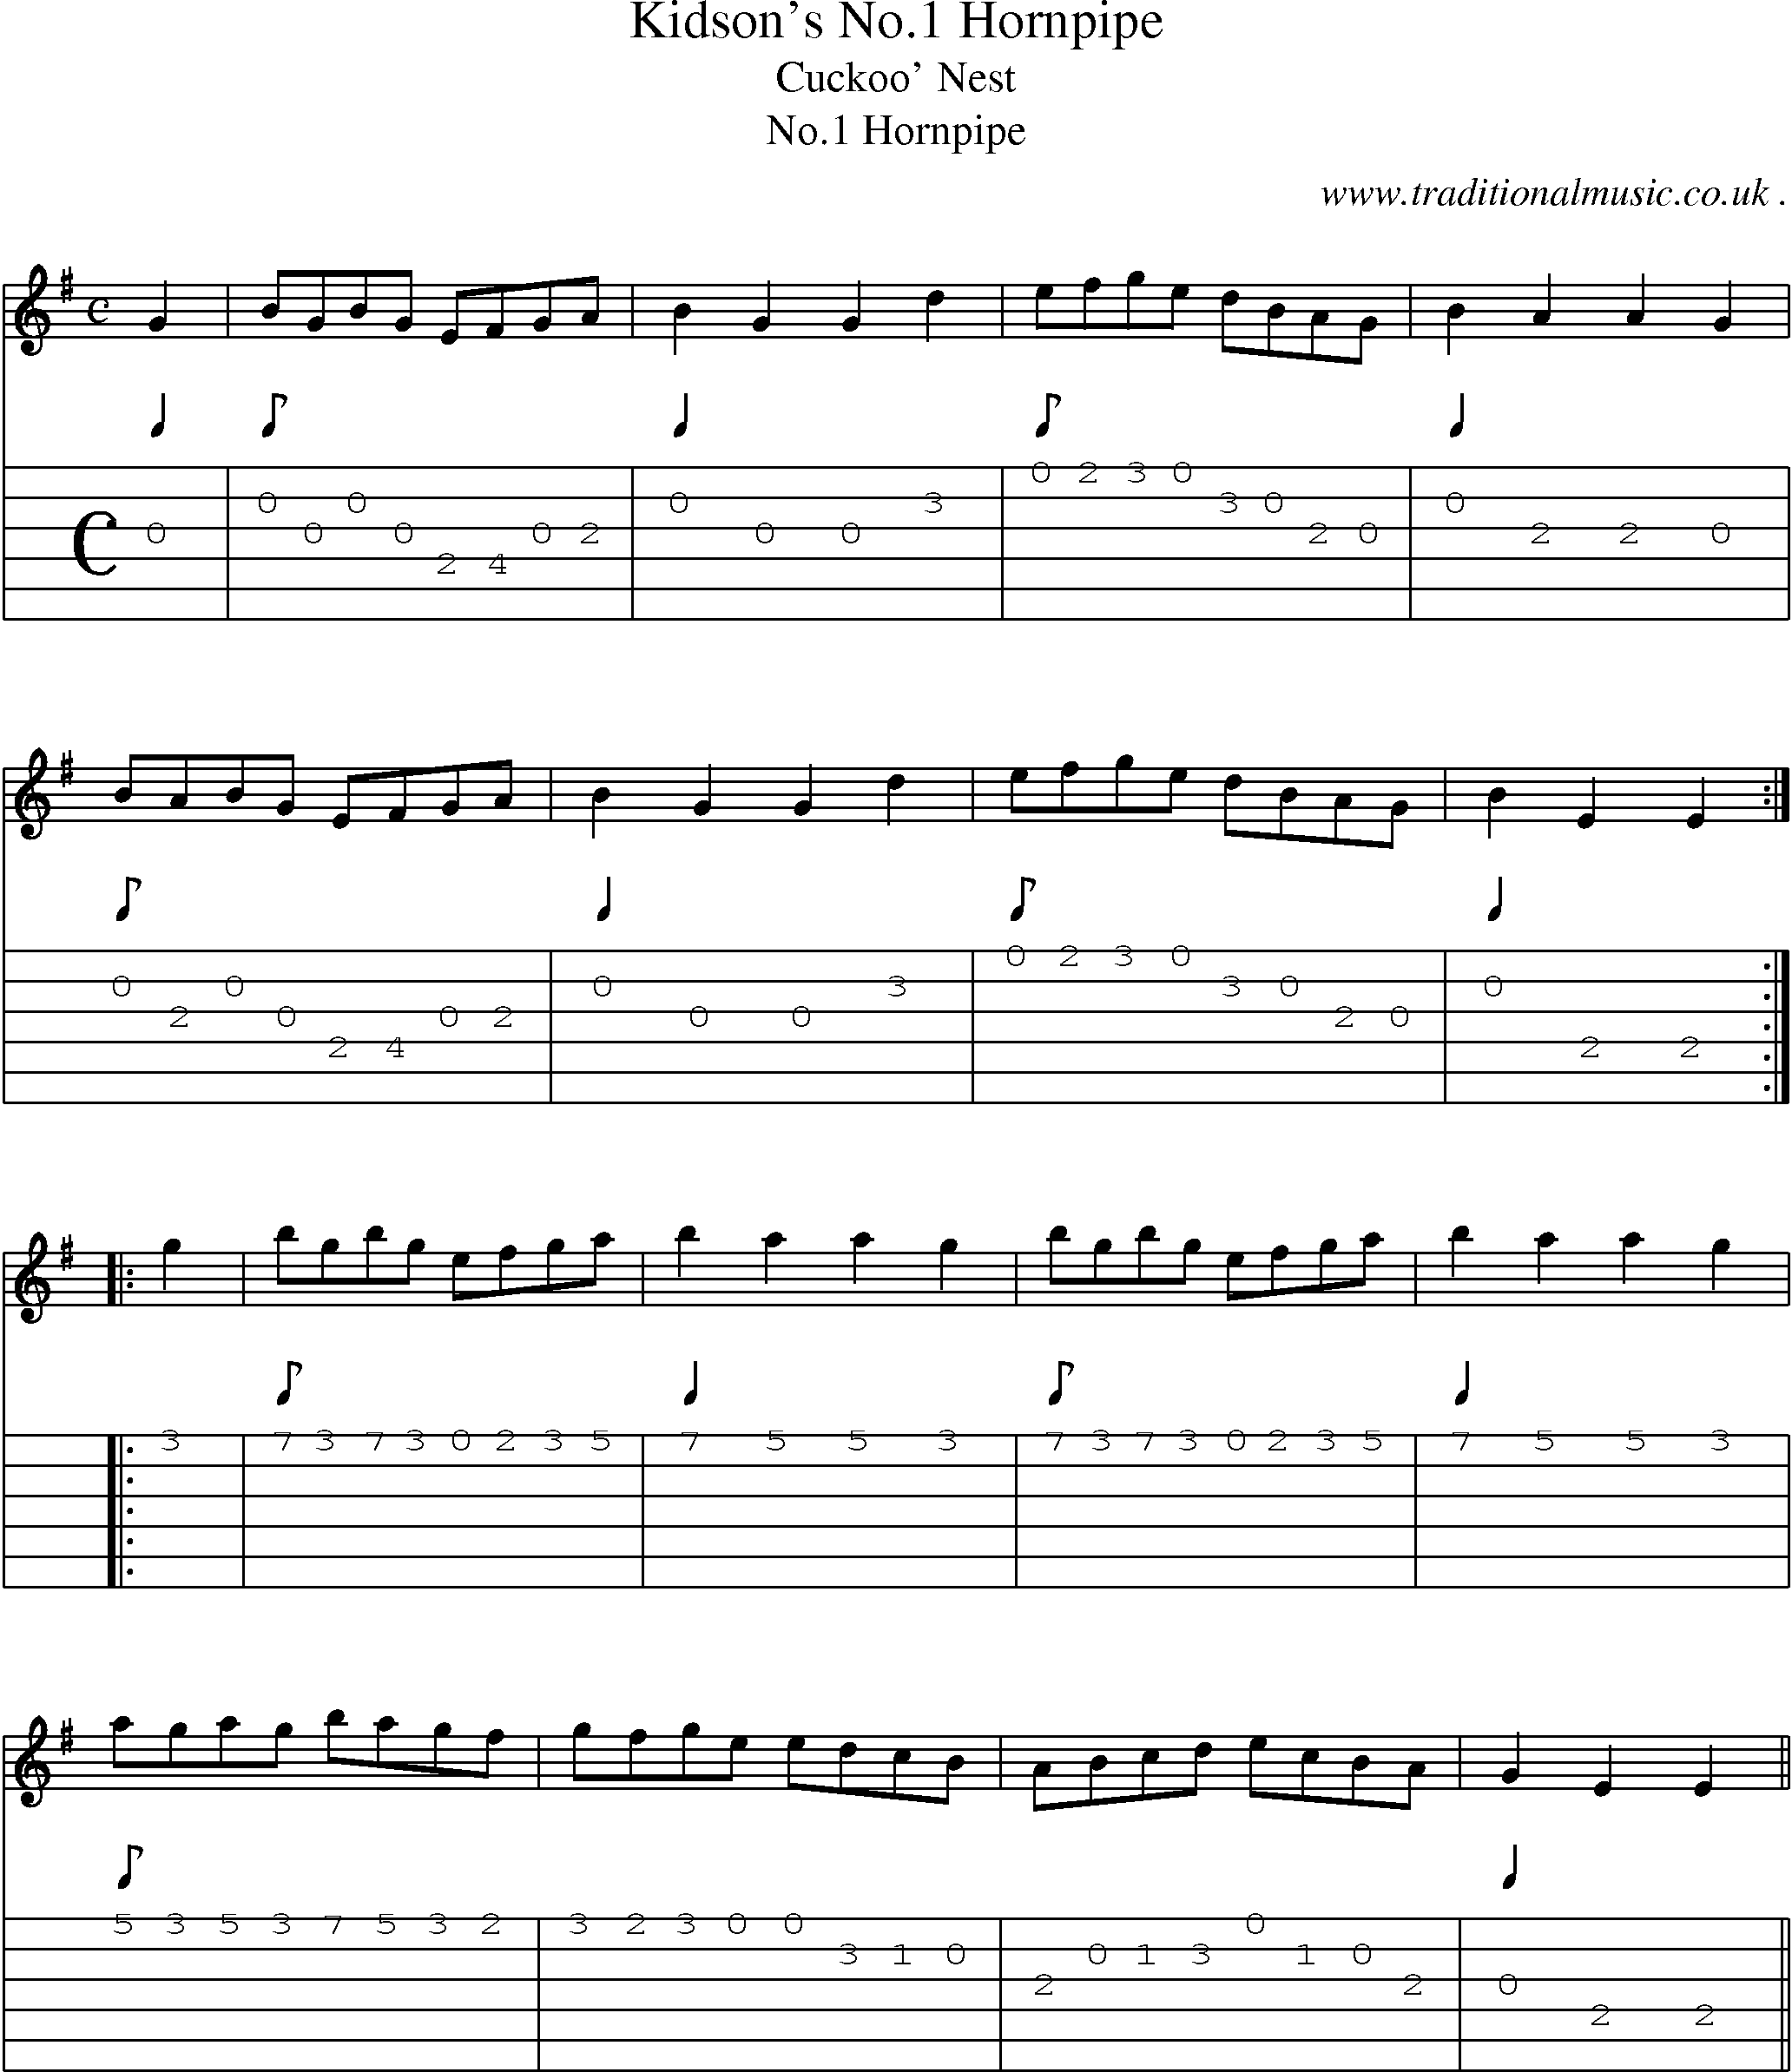 Sheet-Music and Guitar Tabs for Kidsons No1 Hornpipe